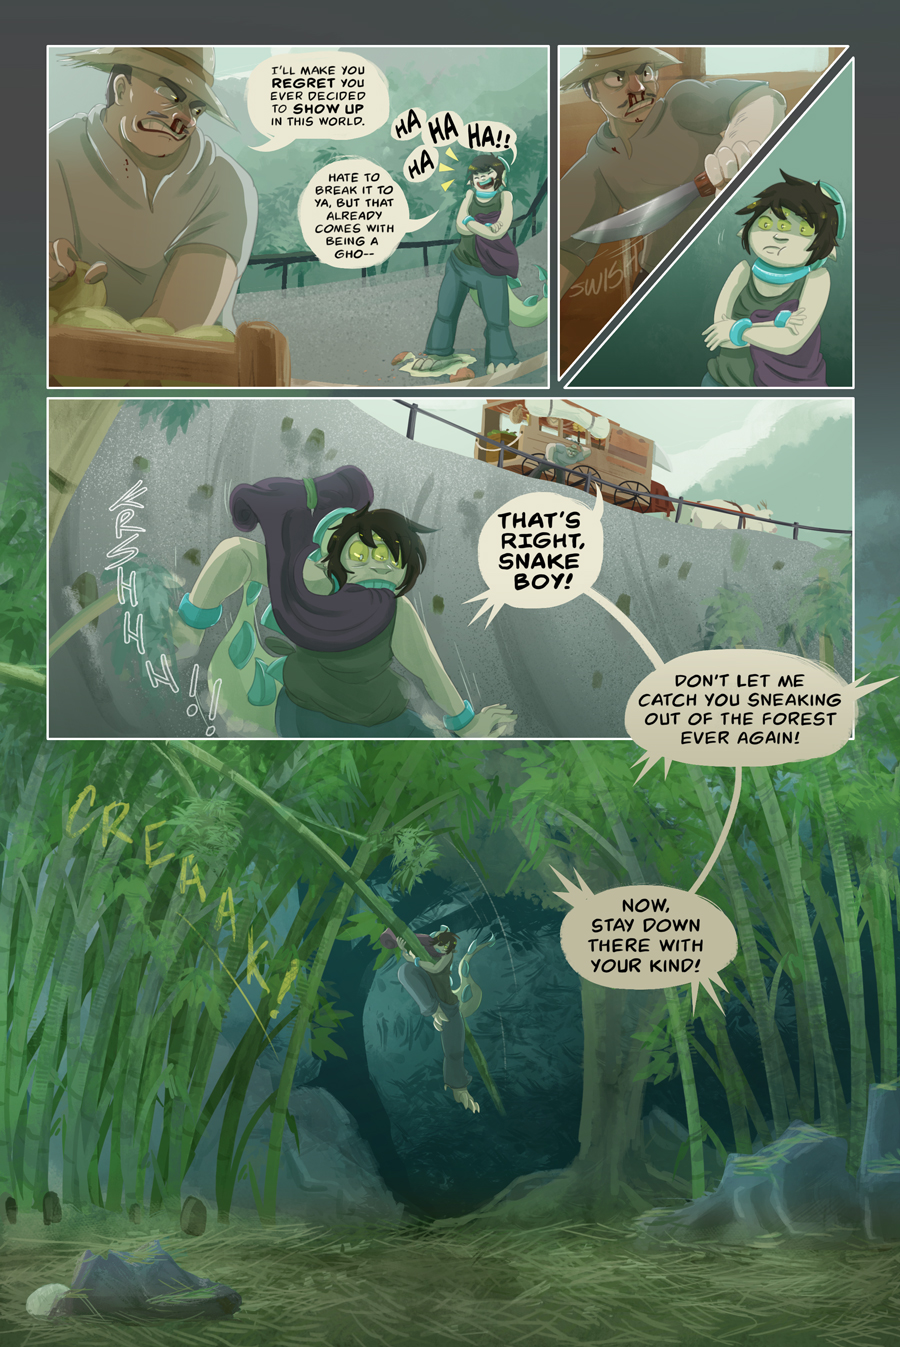 Chapter 5, page 24